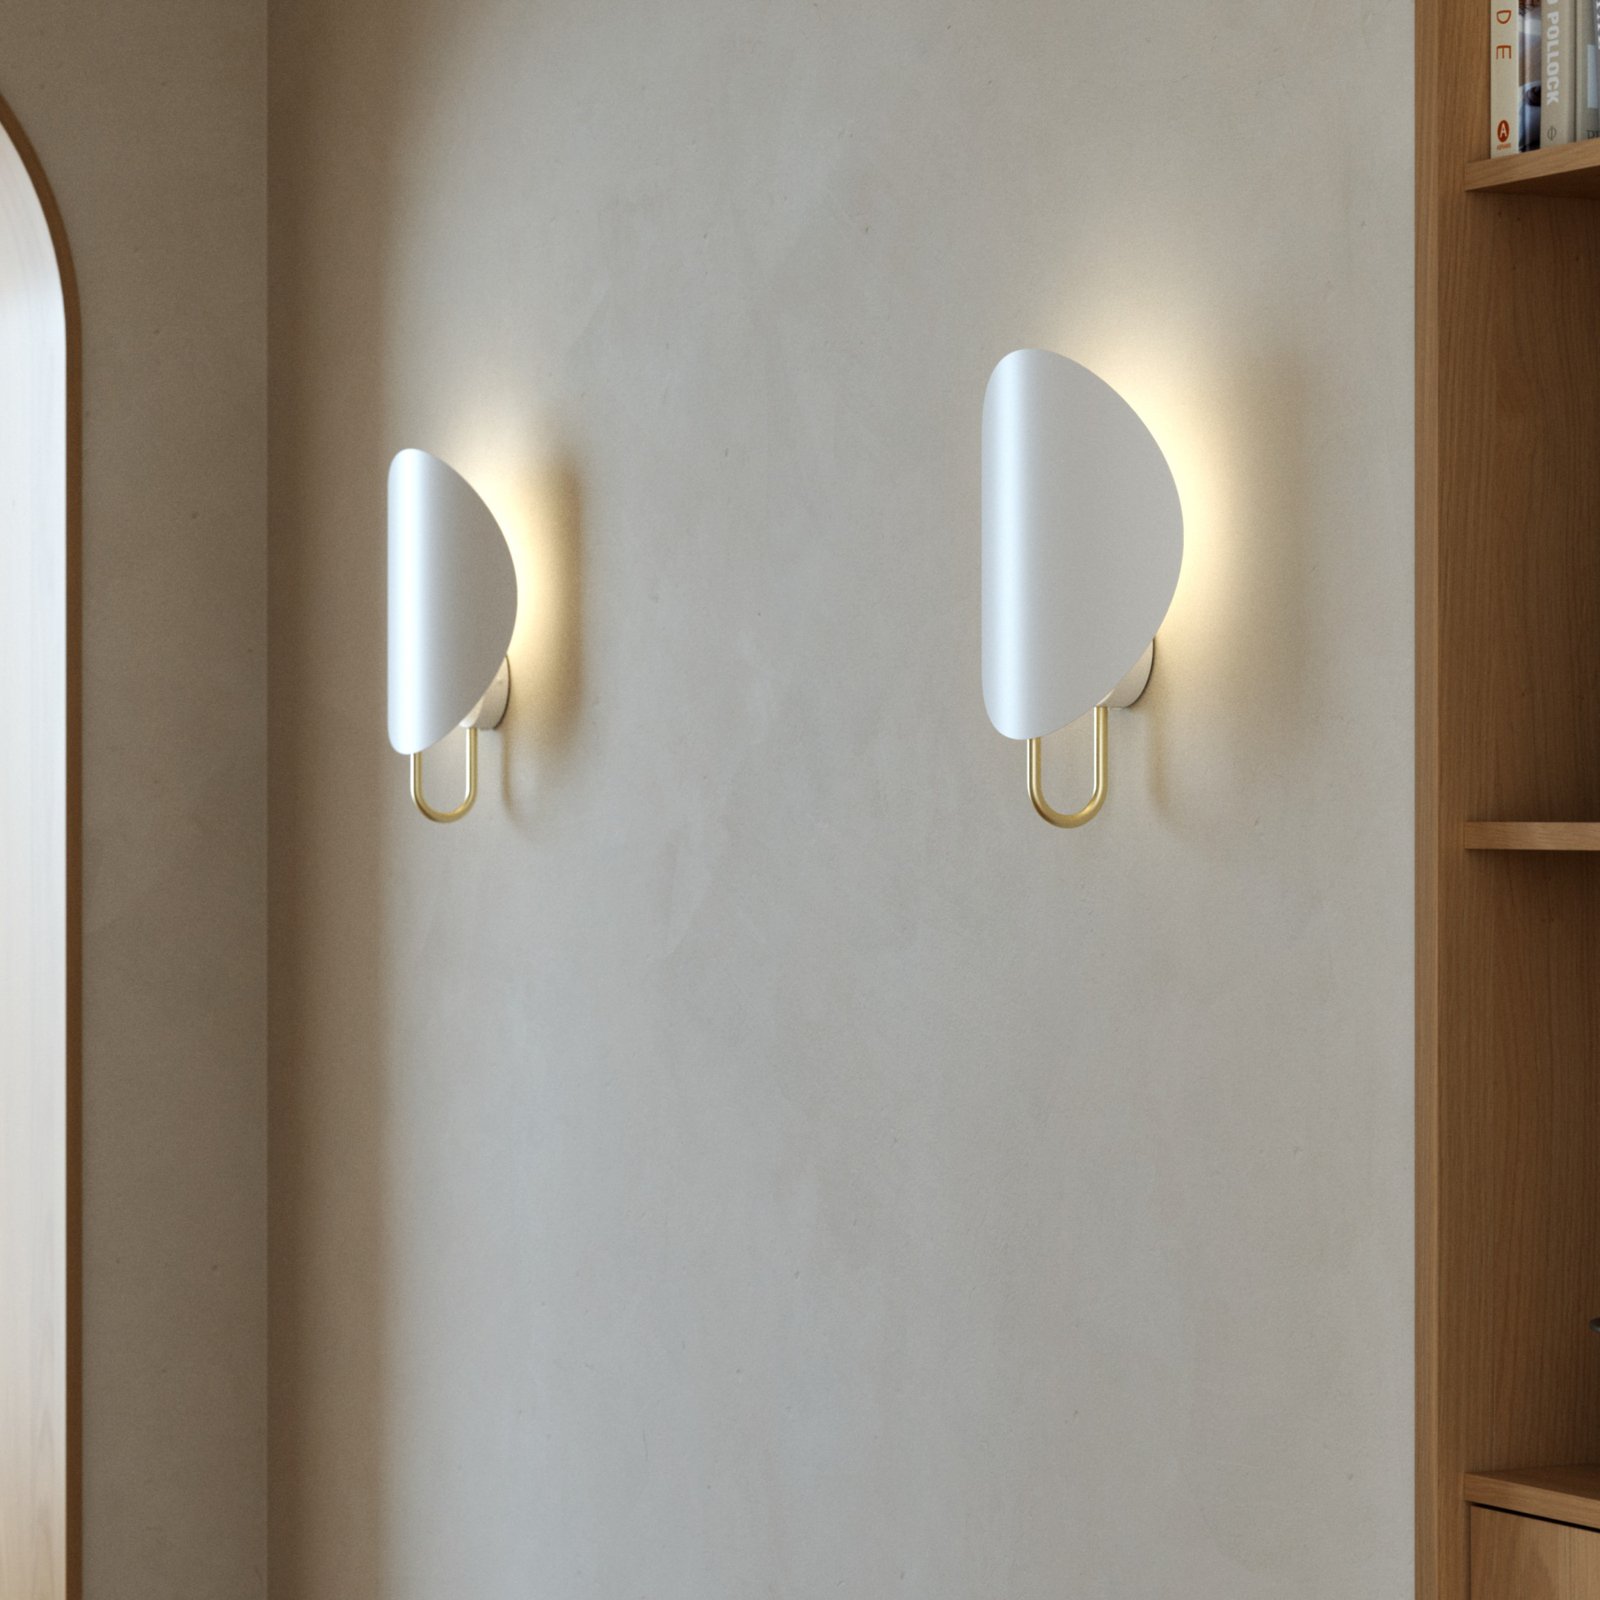 Spargo wall light, indirect light, white/gold